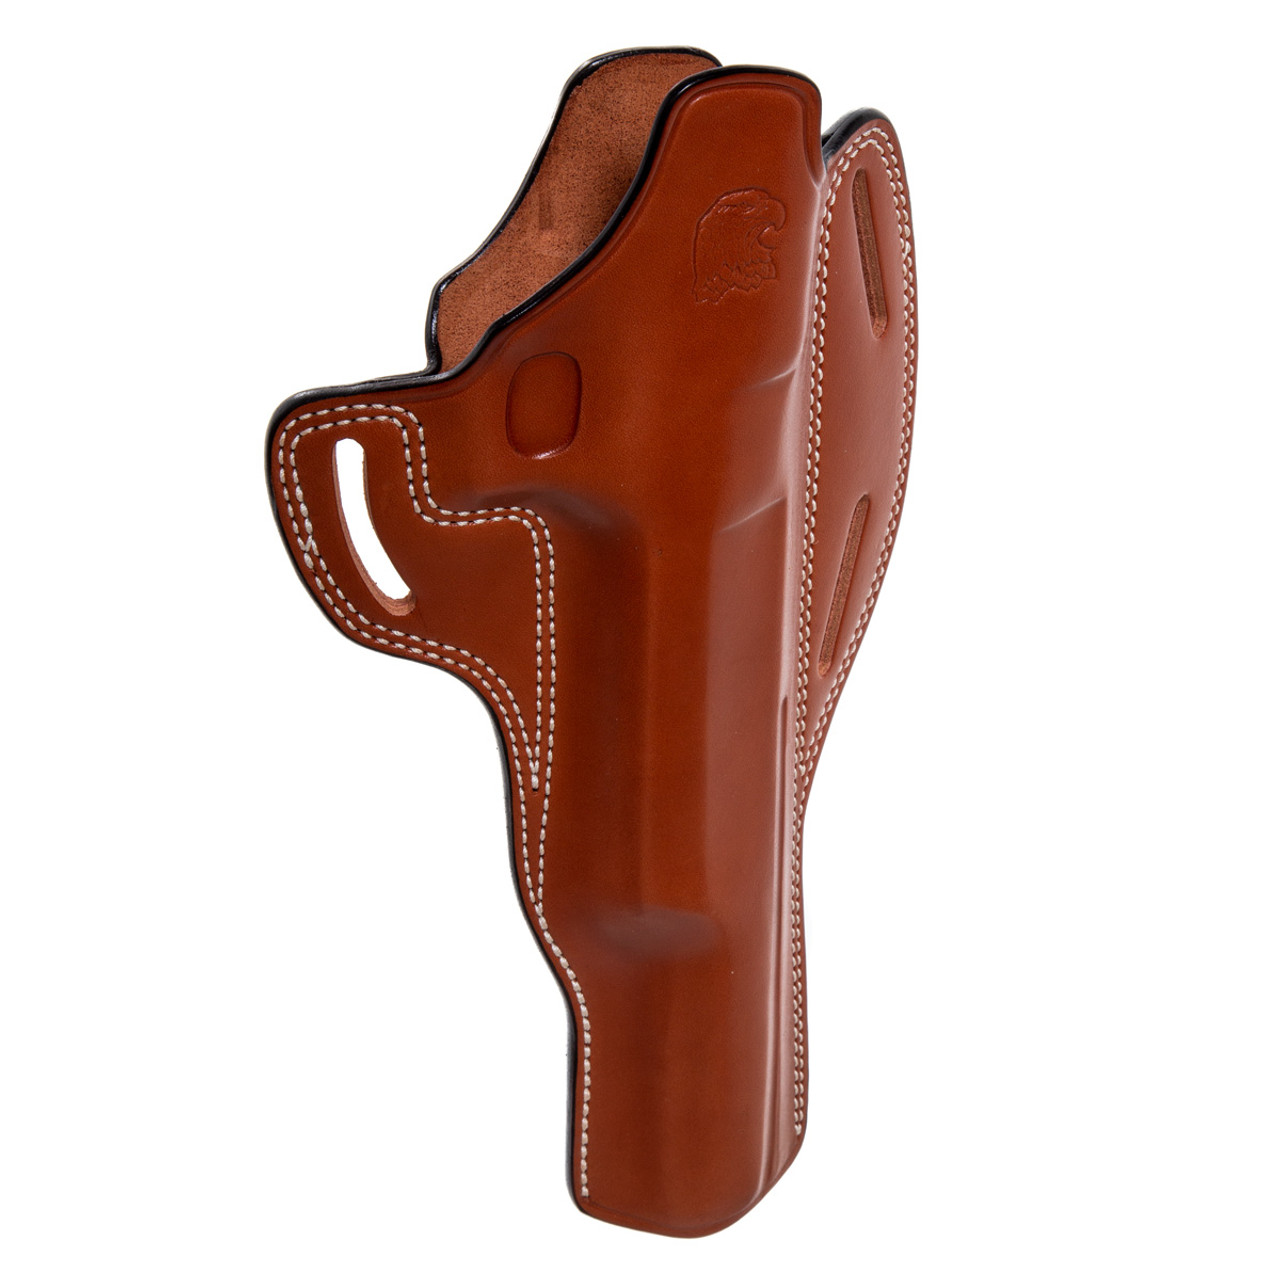 Leather Thumb Break  Holster Desert Eagle Fits All Calibers With 6"BBL 